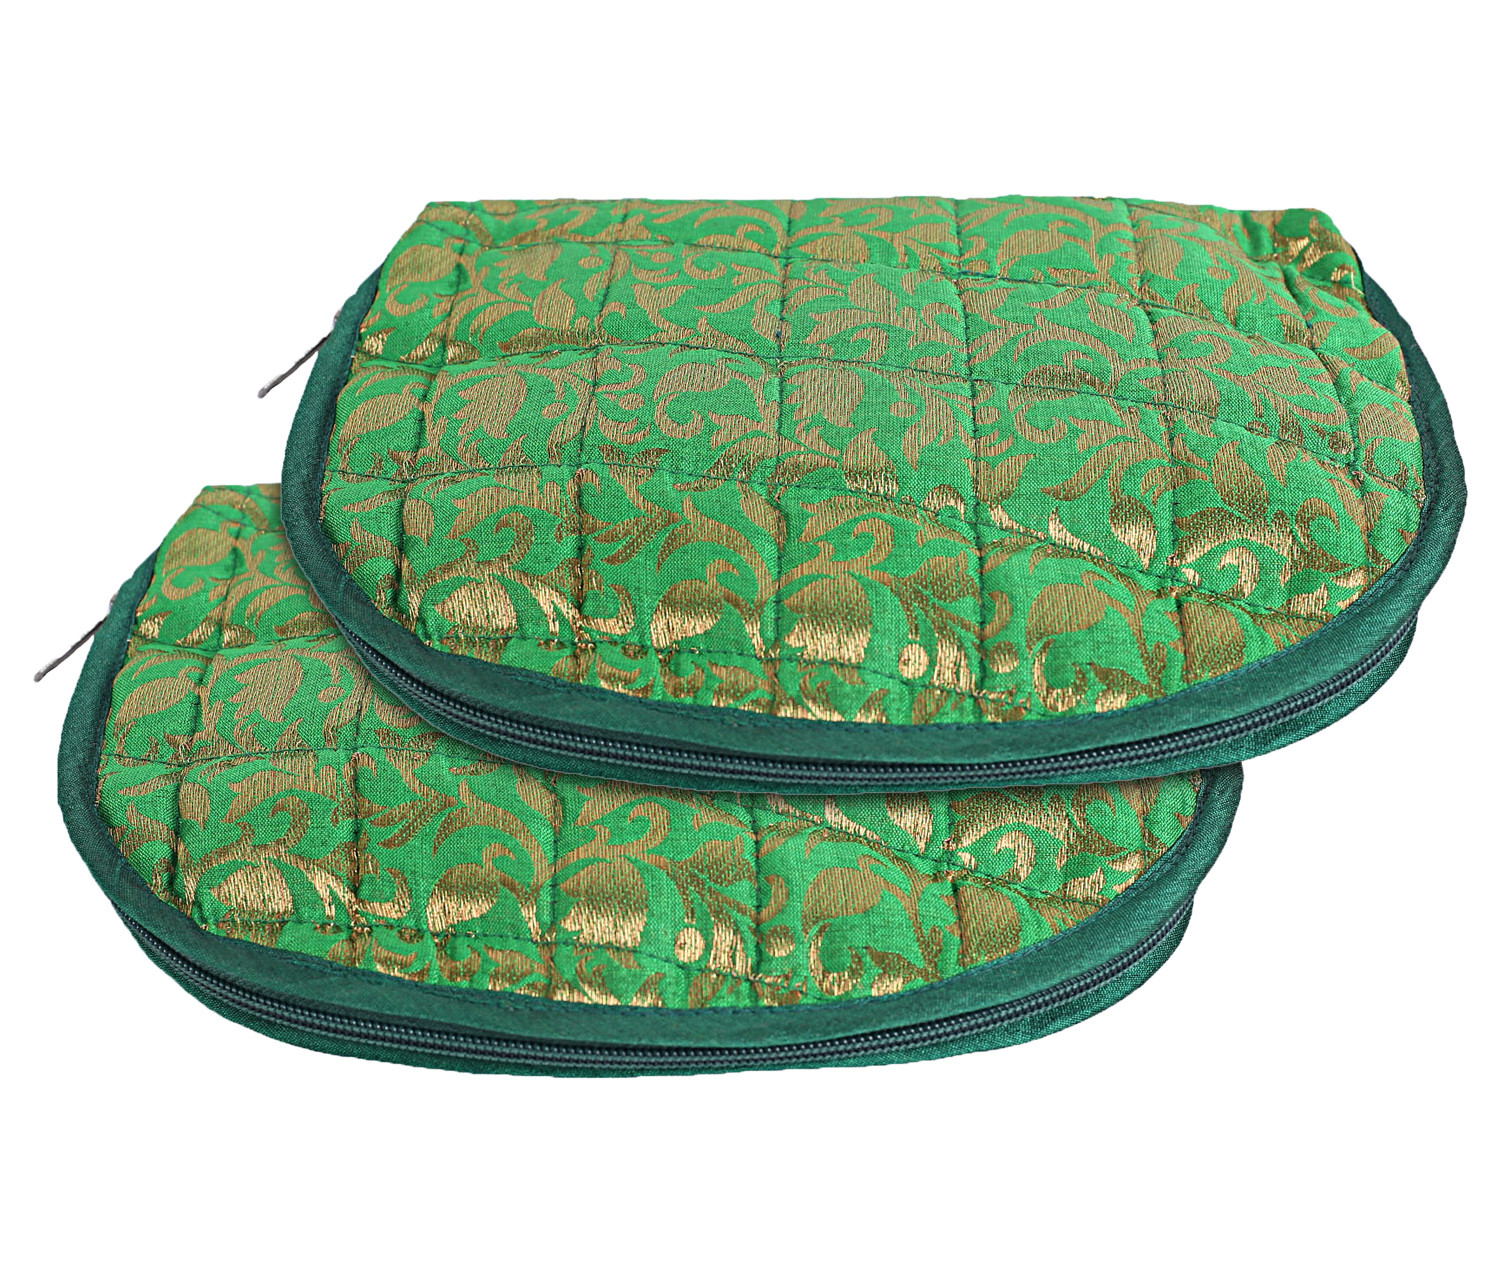 Kuber Industries Polyester Jacquard Print Toiletry Organizer With 4 Transparent Poches & 1 Extra Compartment,Zipper Closure (Green)